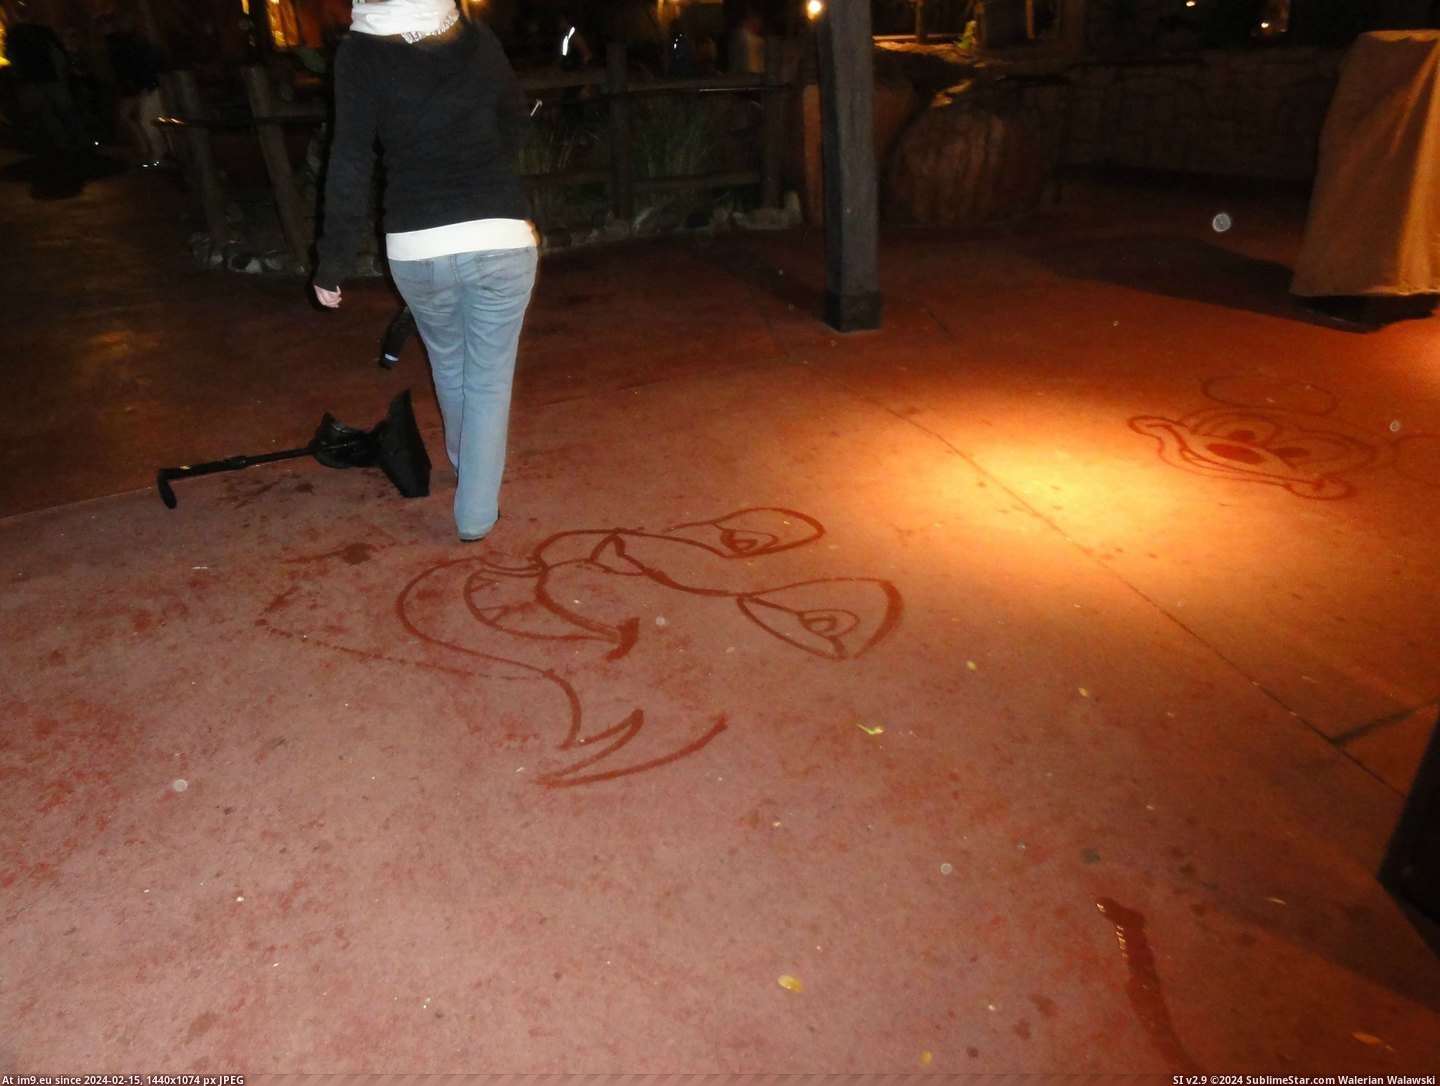 #World #Water #Disney #Guests #Janitor #Broom #Entertain #Characters #Drew #Sidewalk [Pics] As a janitor at Disney World, I drew characters with water and a broom on the sidewalk to entertain guests. 5 Pic. (Изображение из альбом My r/PICS favs))